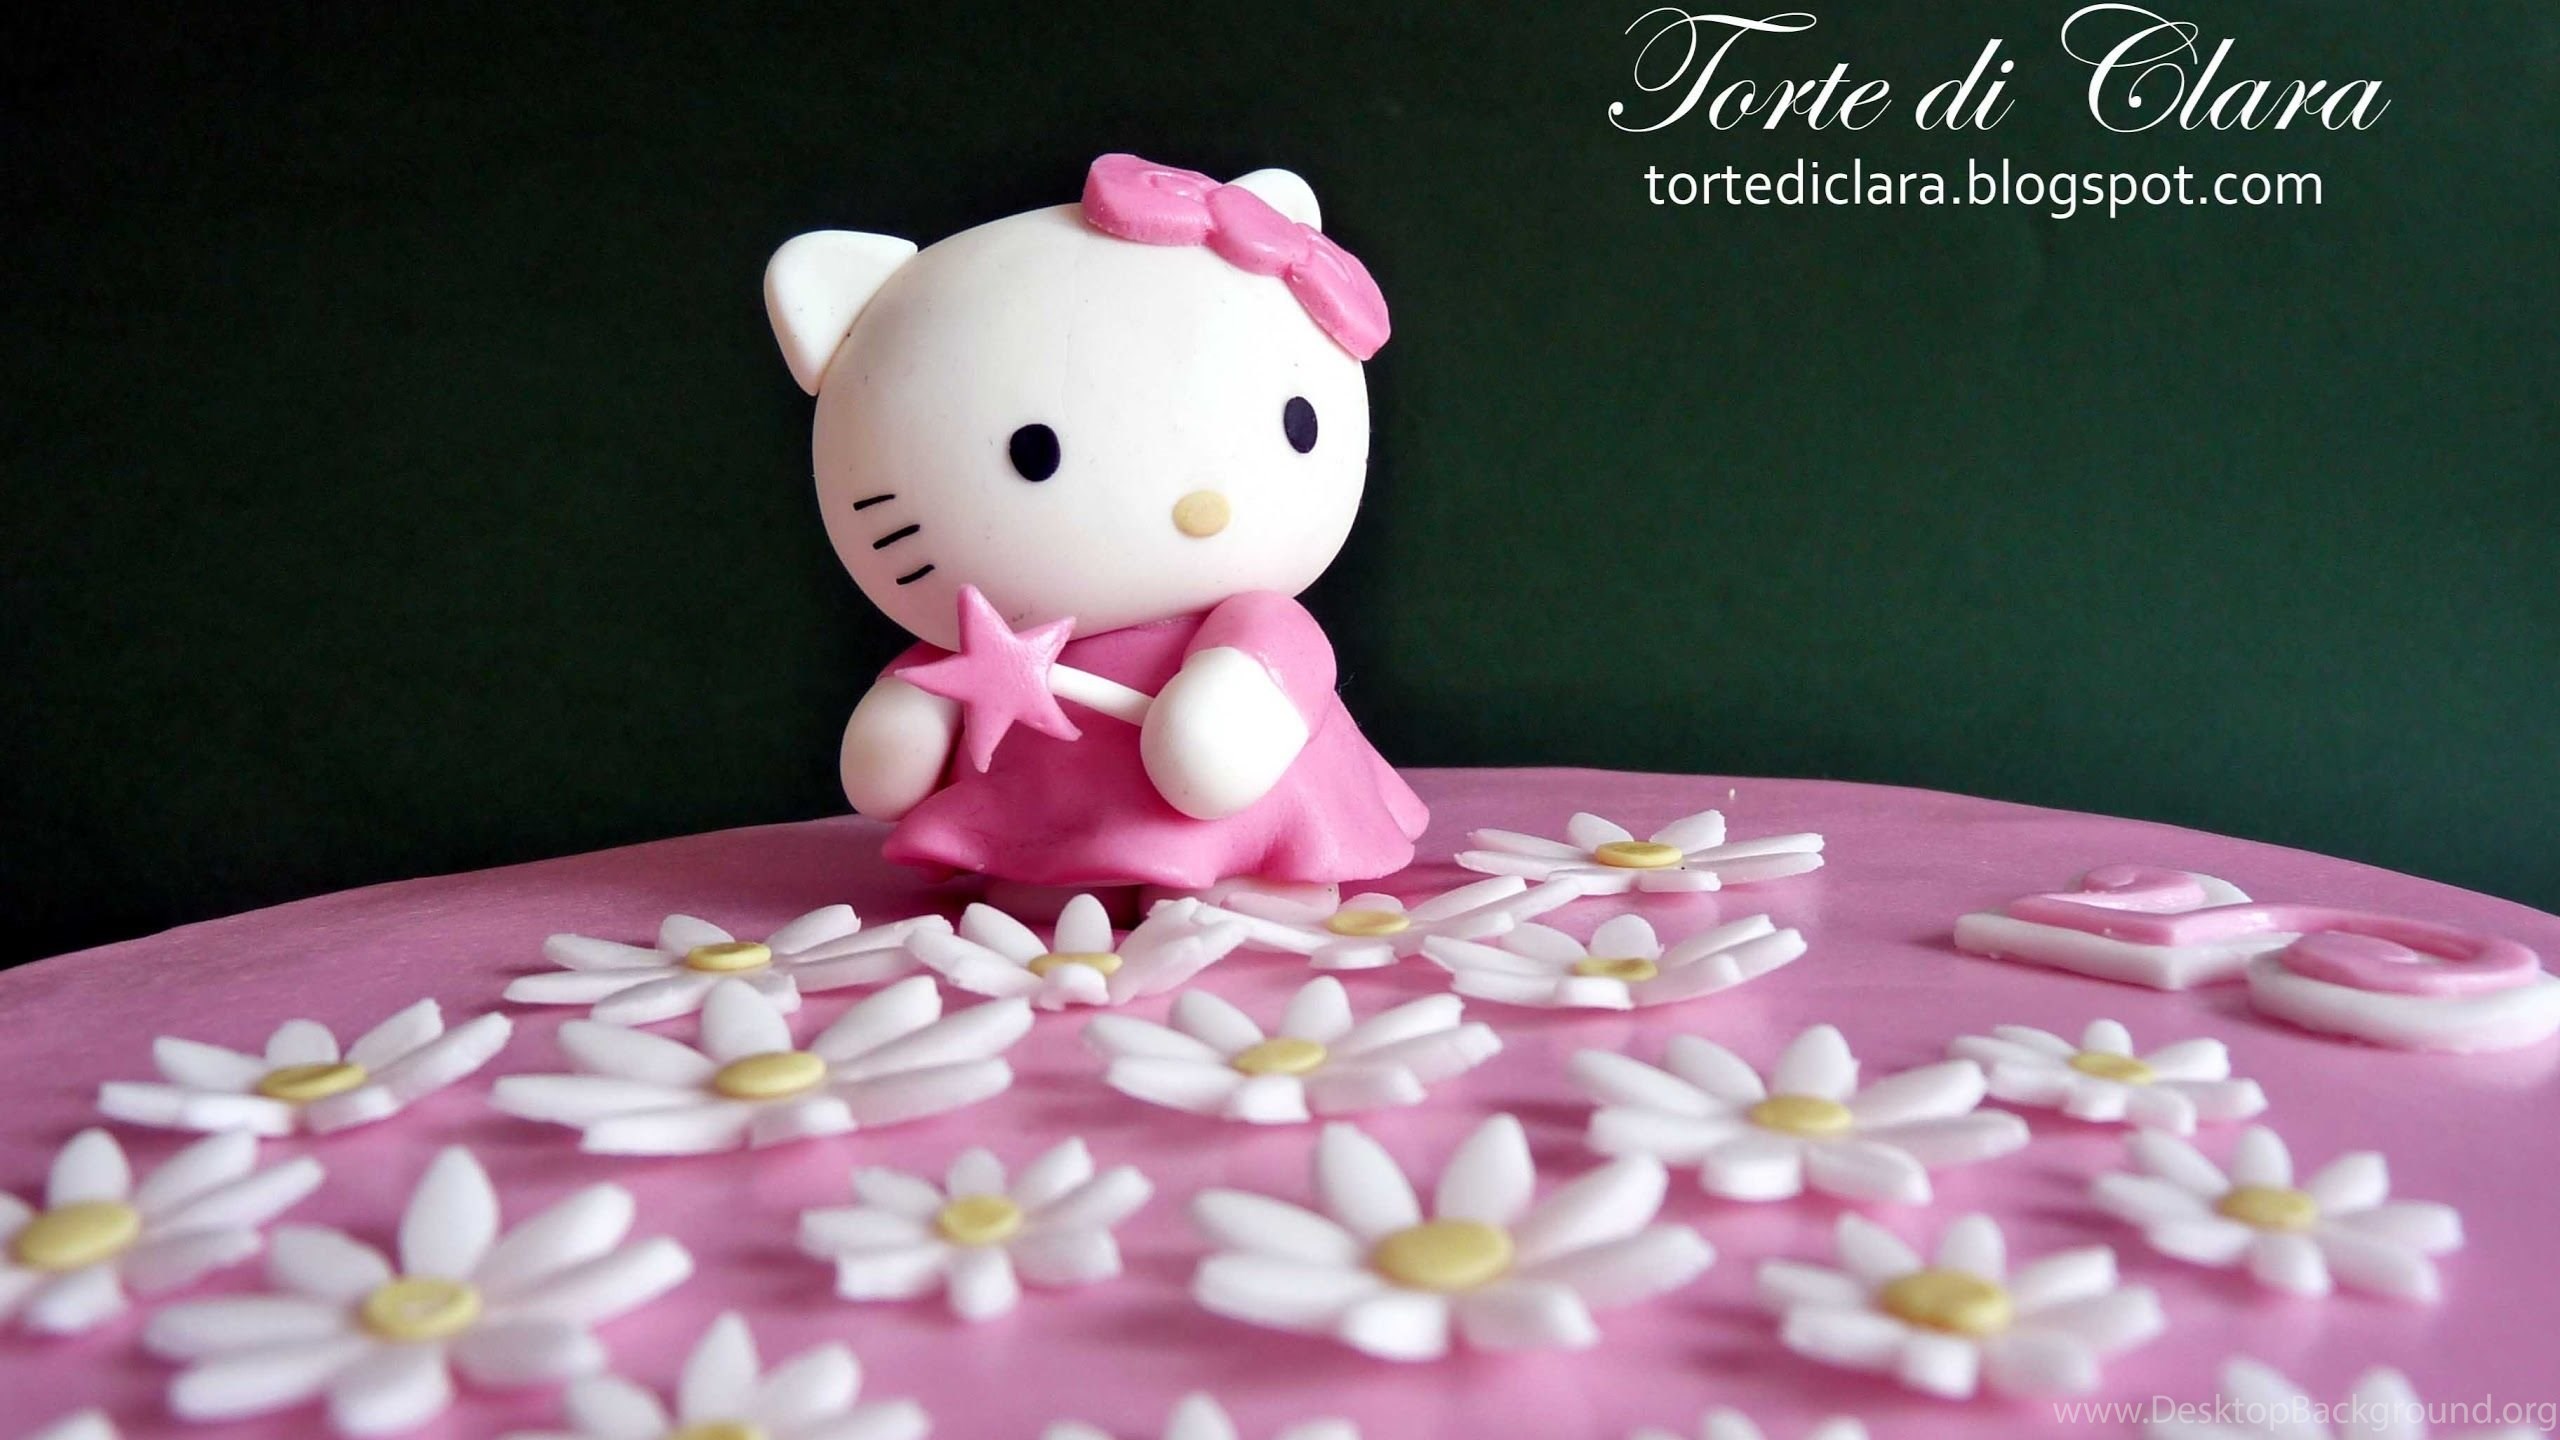 Download Wallpaper Hello Kitty 3d Image Num 35